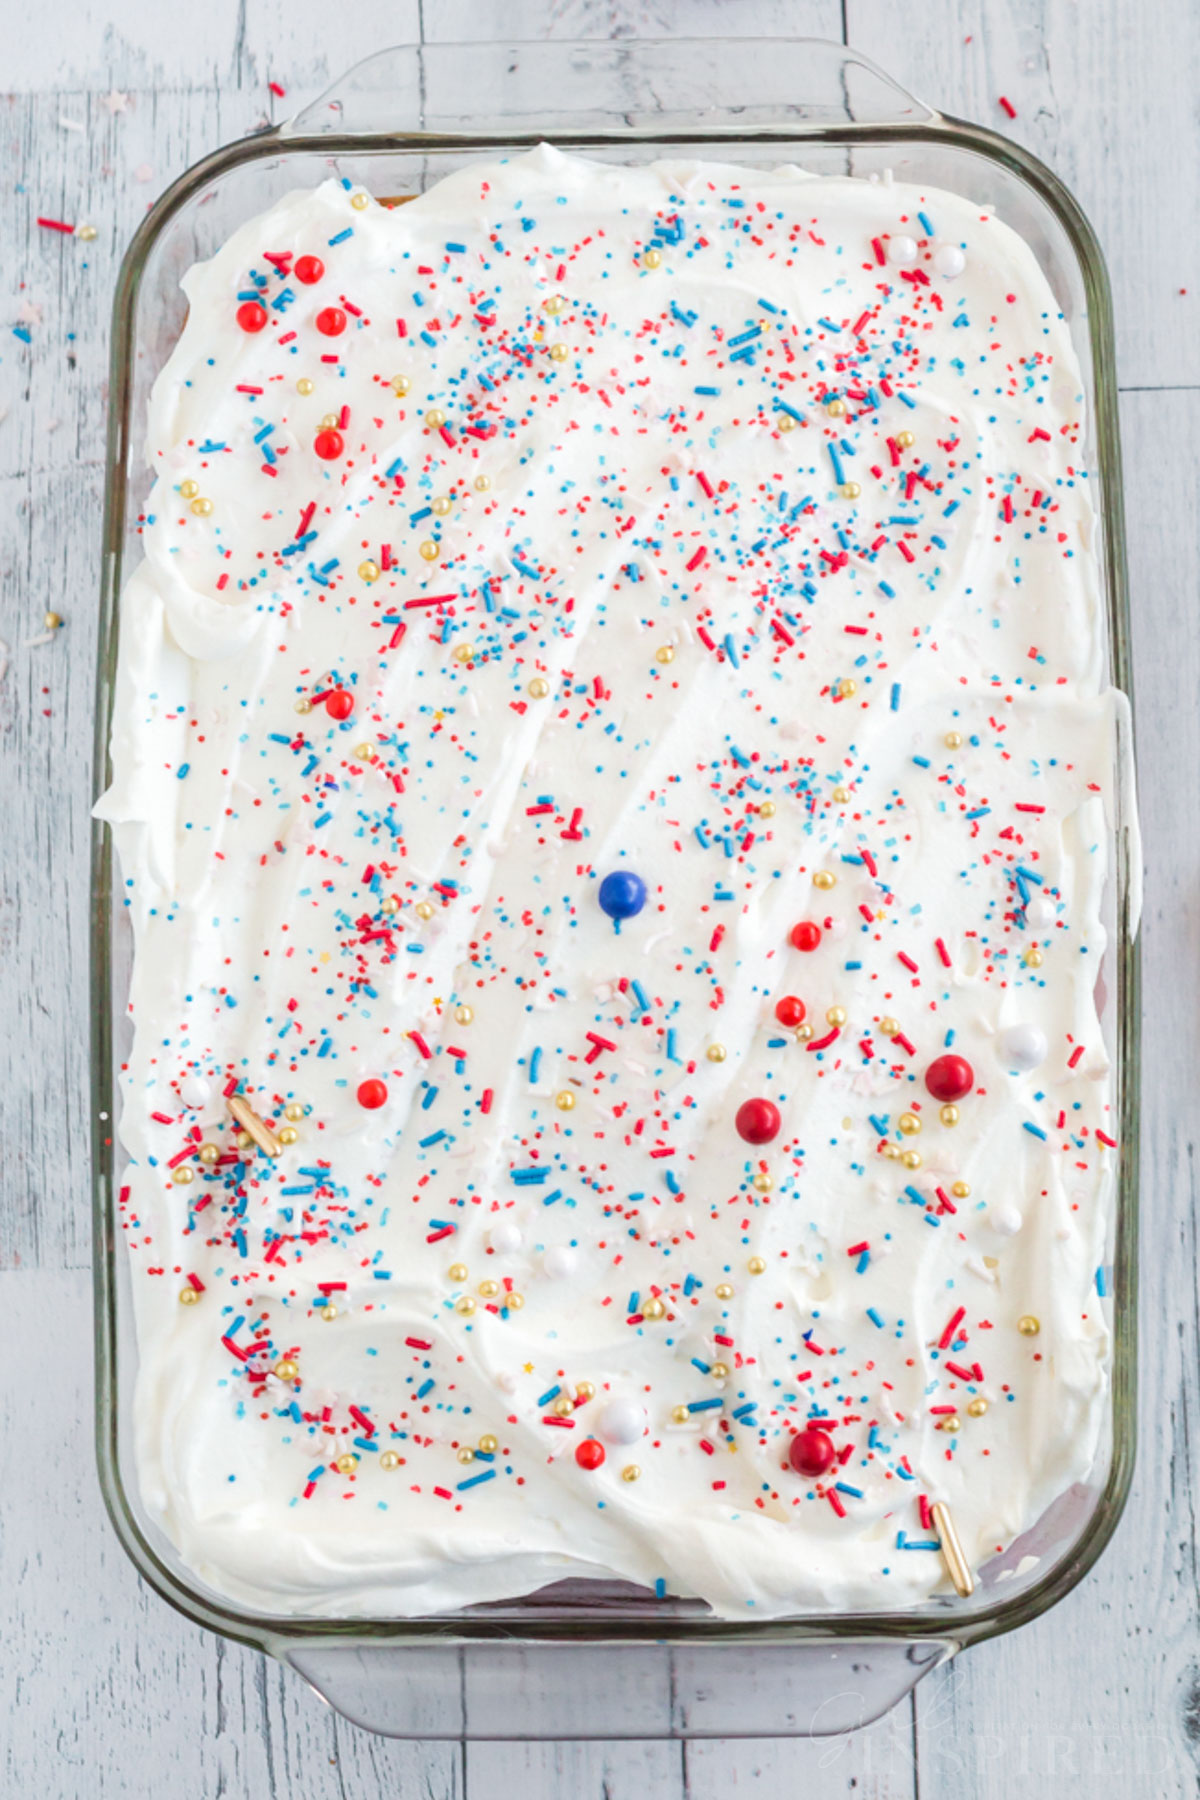 Cake topped with whipped cream and red, white, and blue sprinkles.